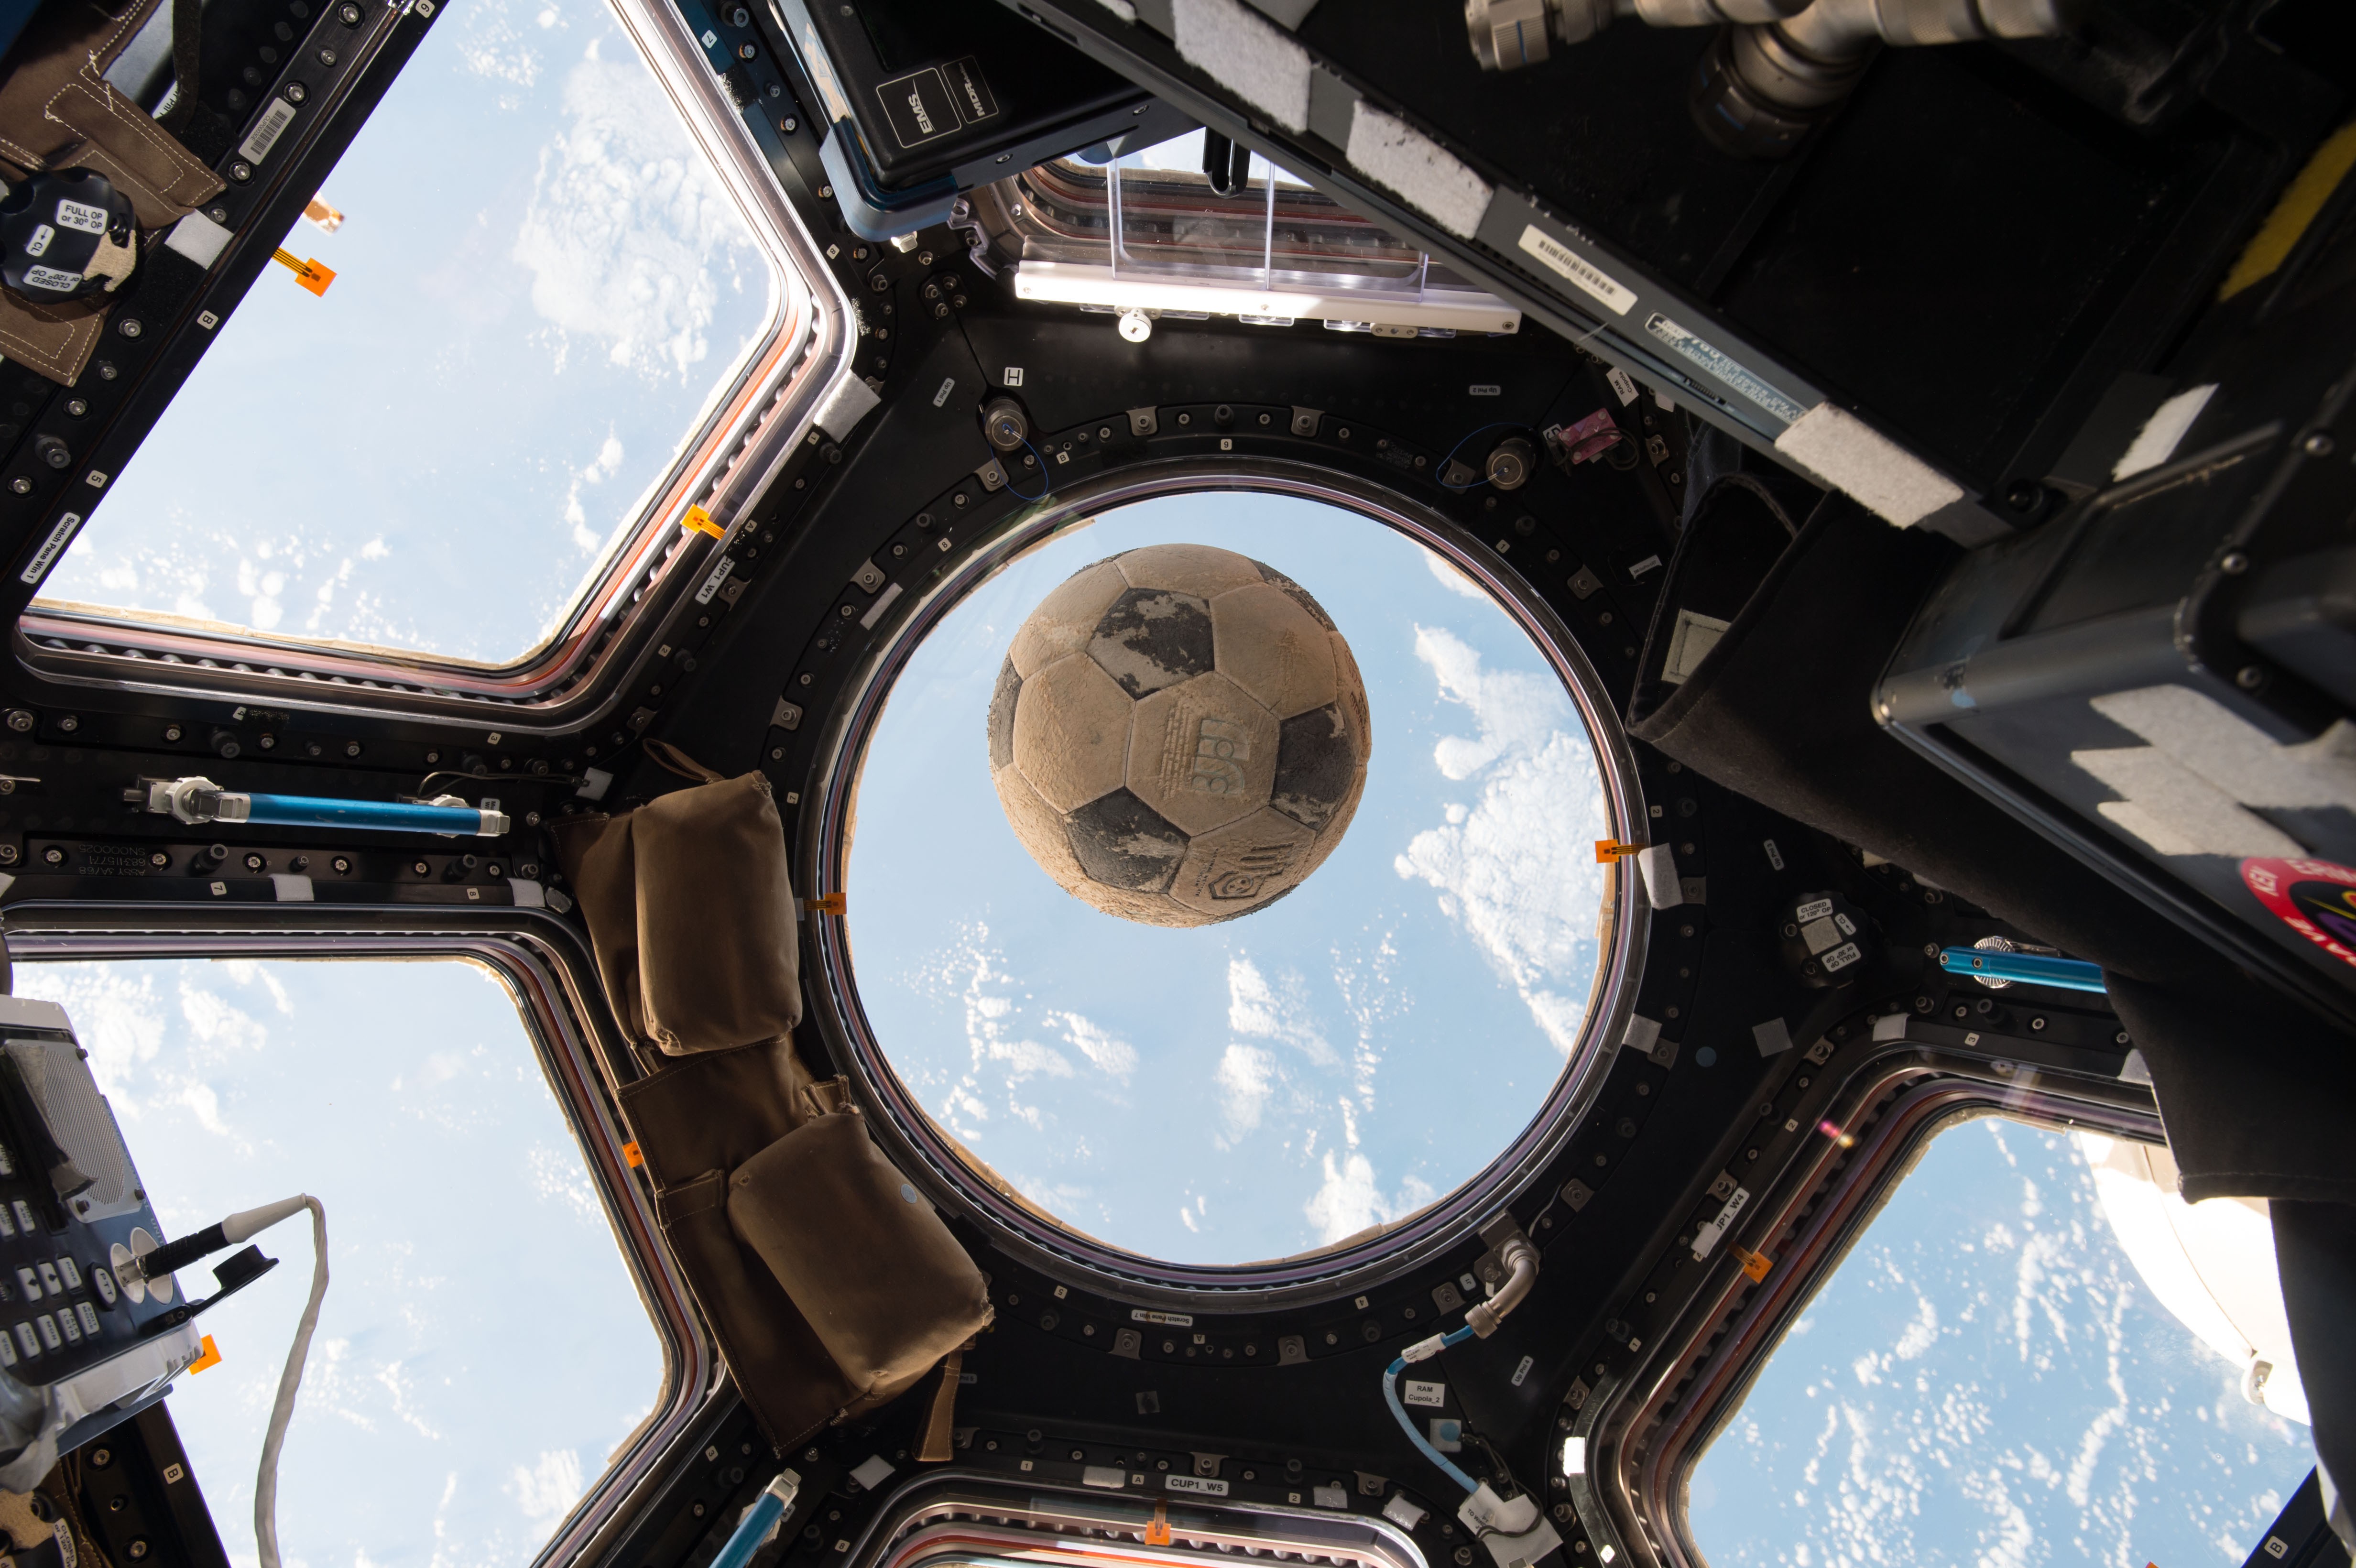 challenger, Space, Soccer ball, Earth, Space station Wallpaper